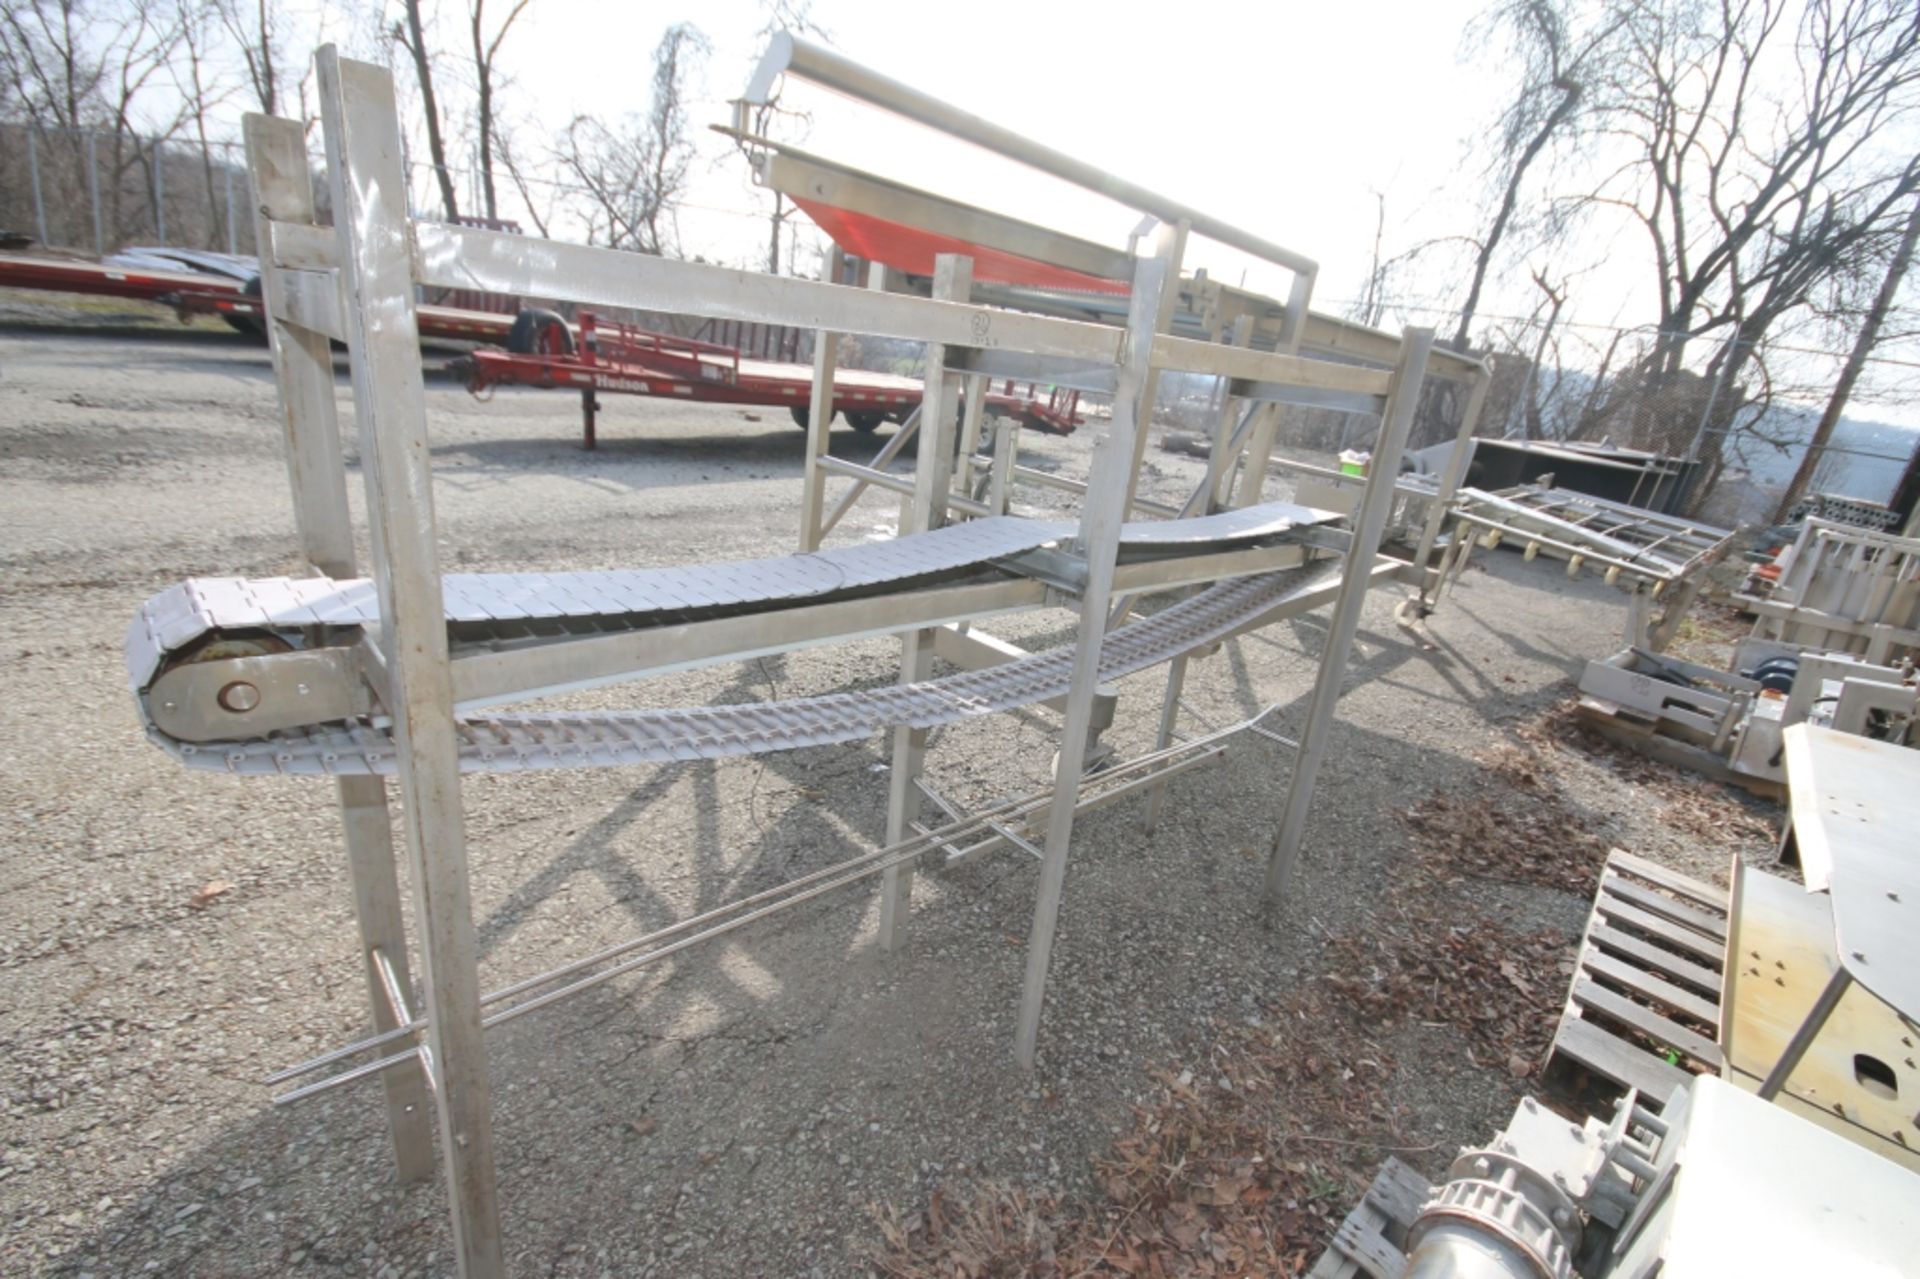 8 ft L x 40" H S/S Conveyor Section with 7.5" W Plastic Chain (INV#73236)(Located at the MDG - Image 2 of 2